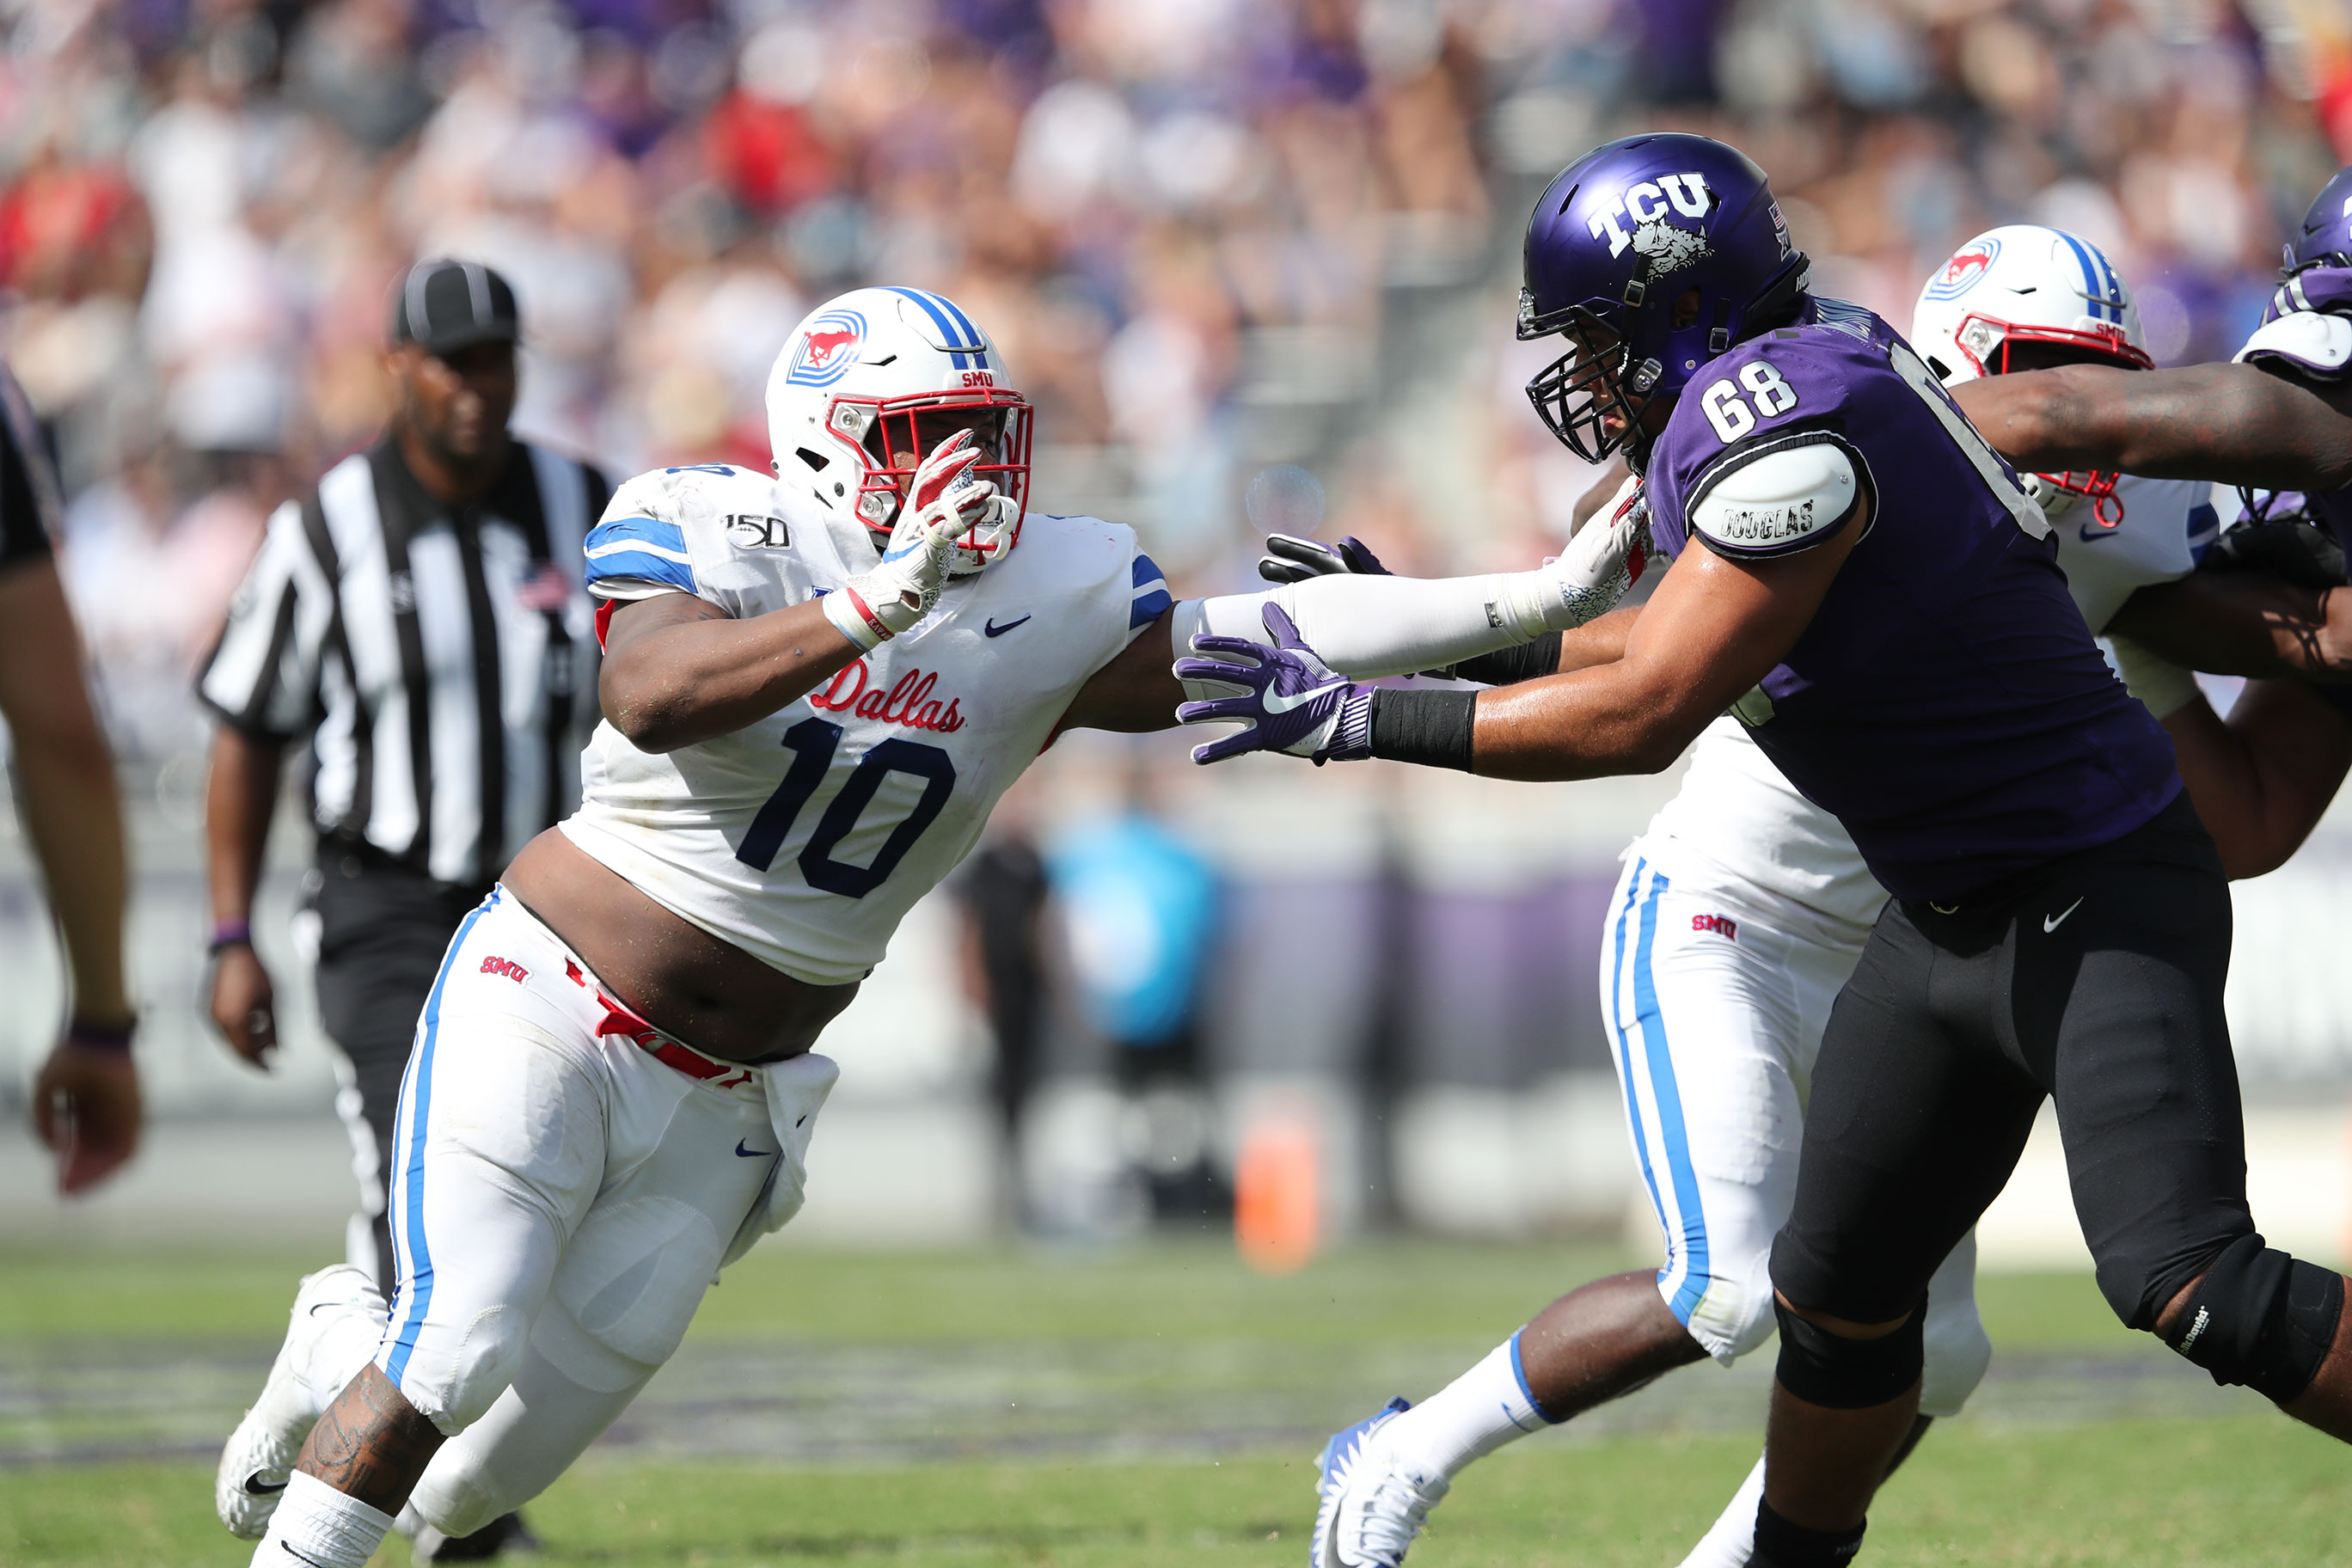 SMU football player (defense) looks to move passed a TCU offensive lineman.